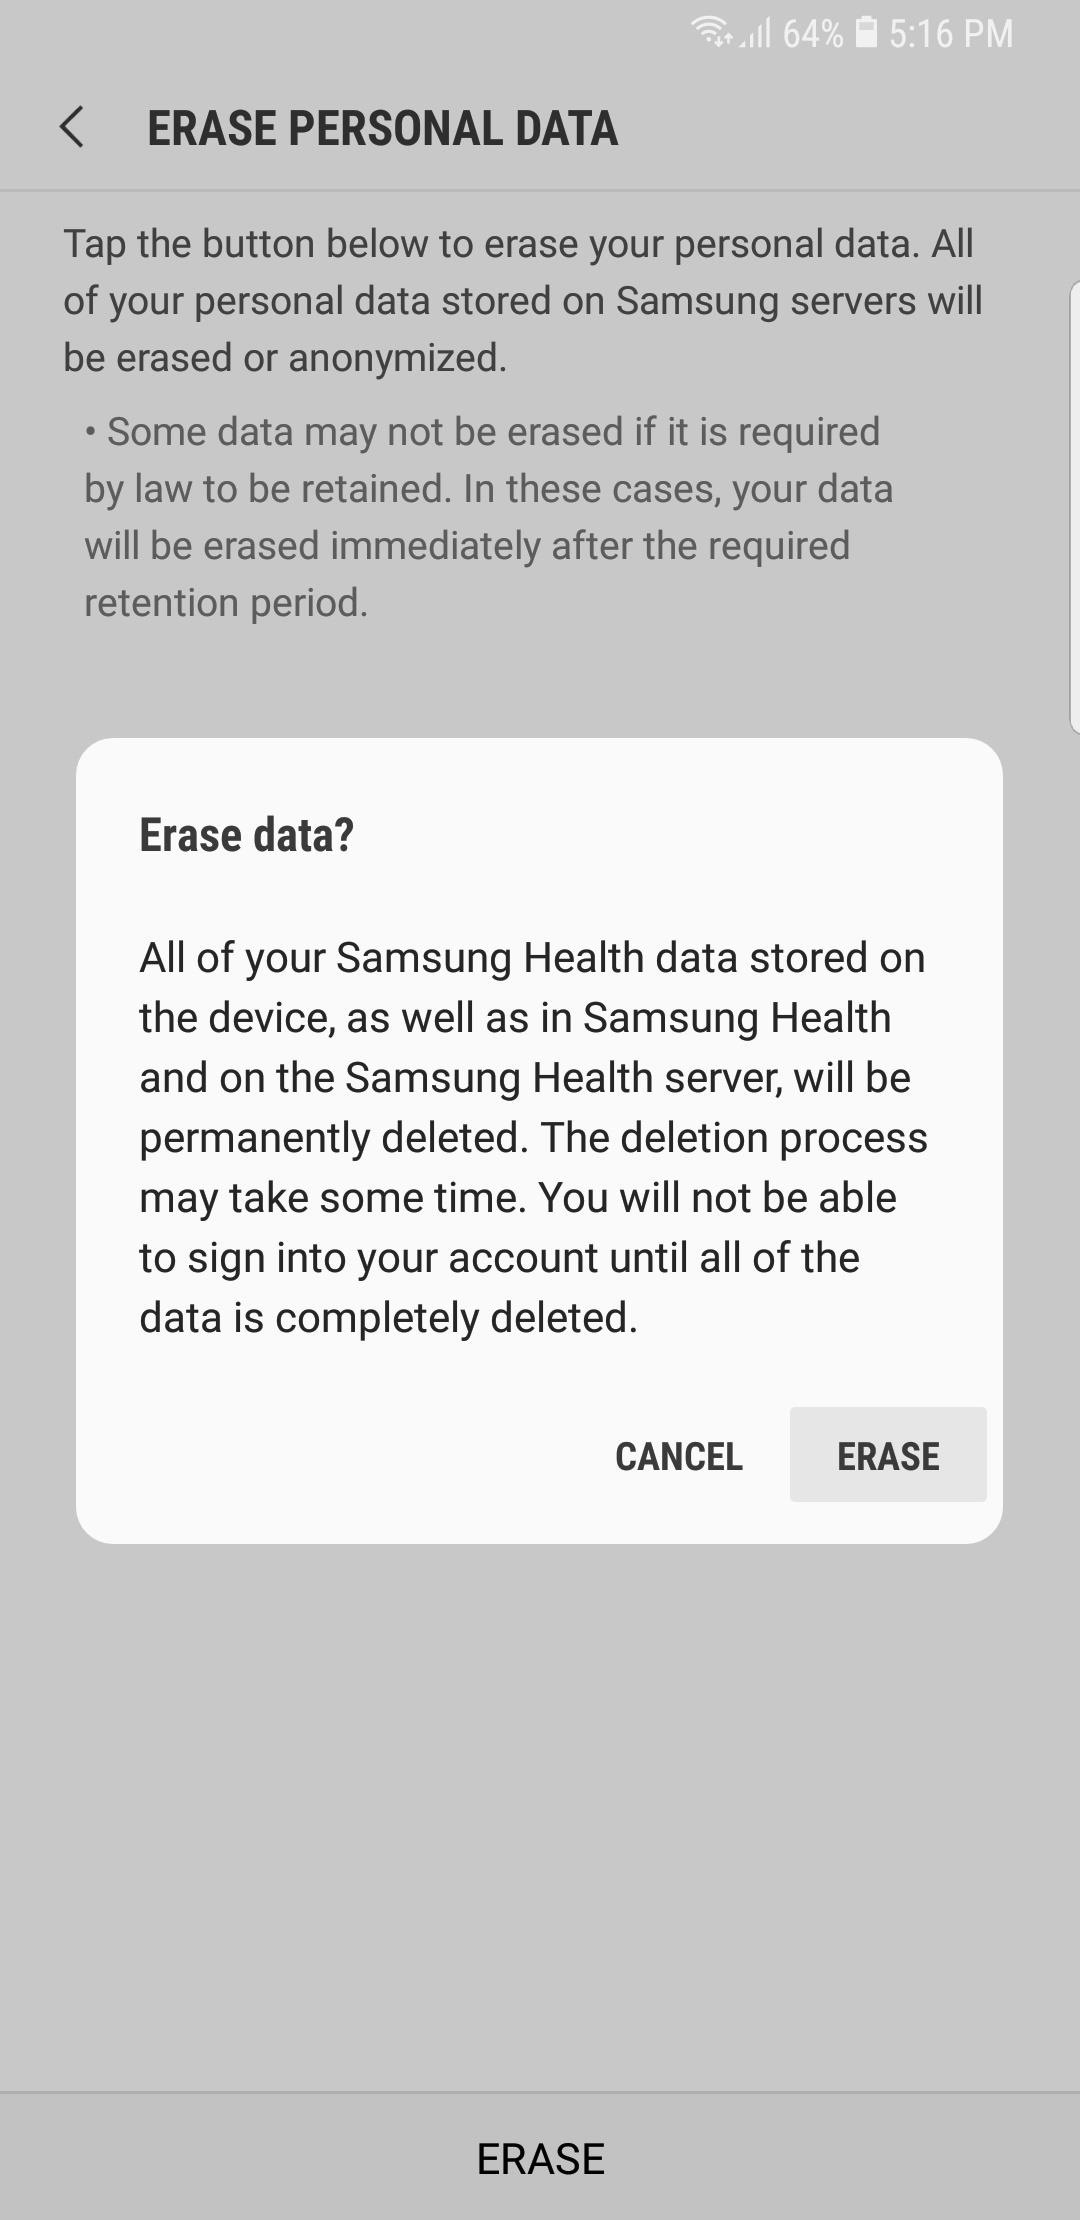 15 Tips to Help You Get the Most Out of Samsung Health